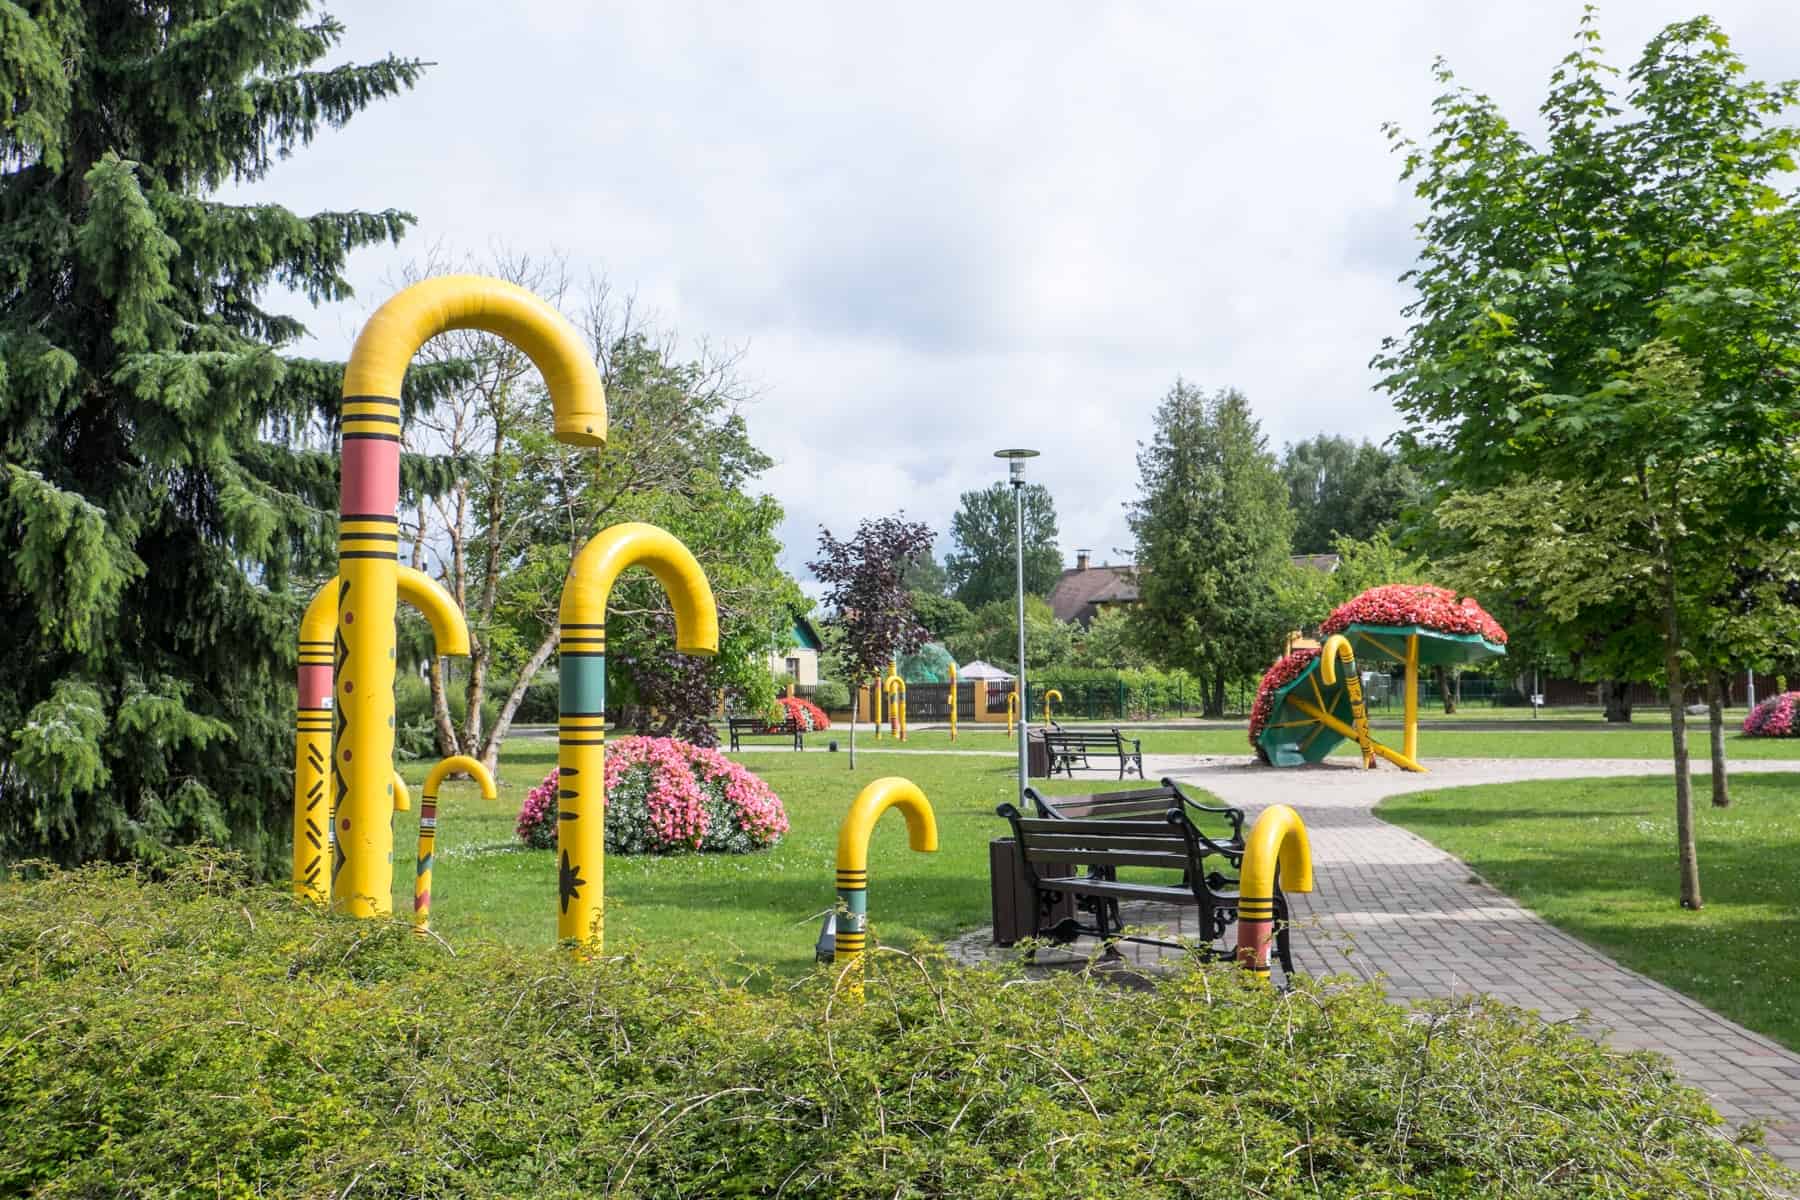 Yellow walking stick structures of varying heights - a symbol of the town - fill a green park in Sigulda, Latvia. 